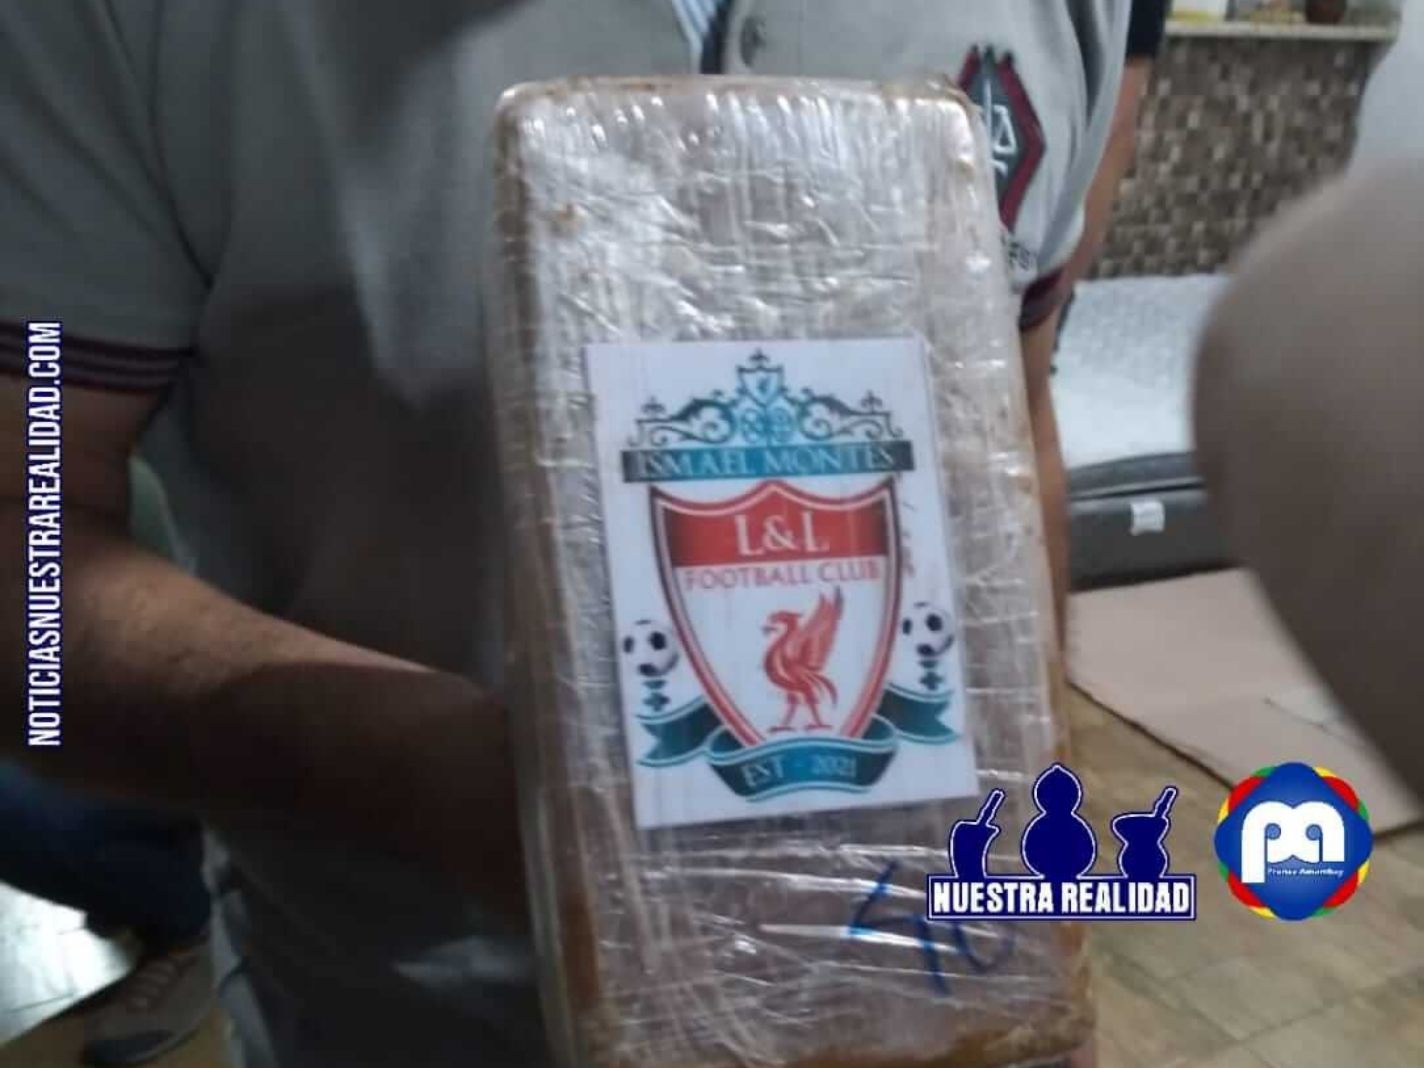 Liverpool branded cocaine in Paraguay